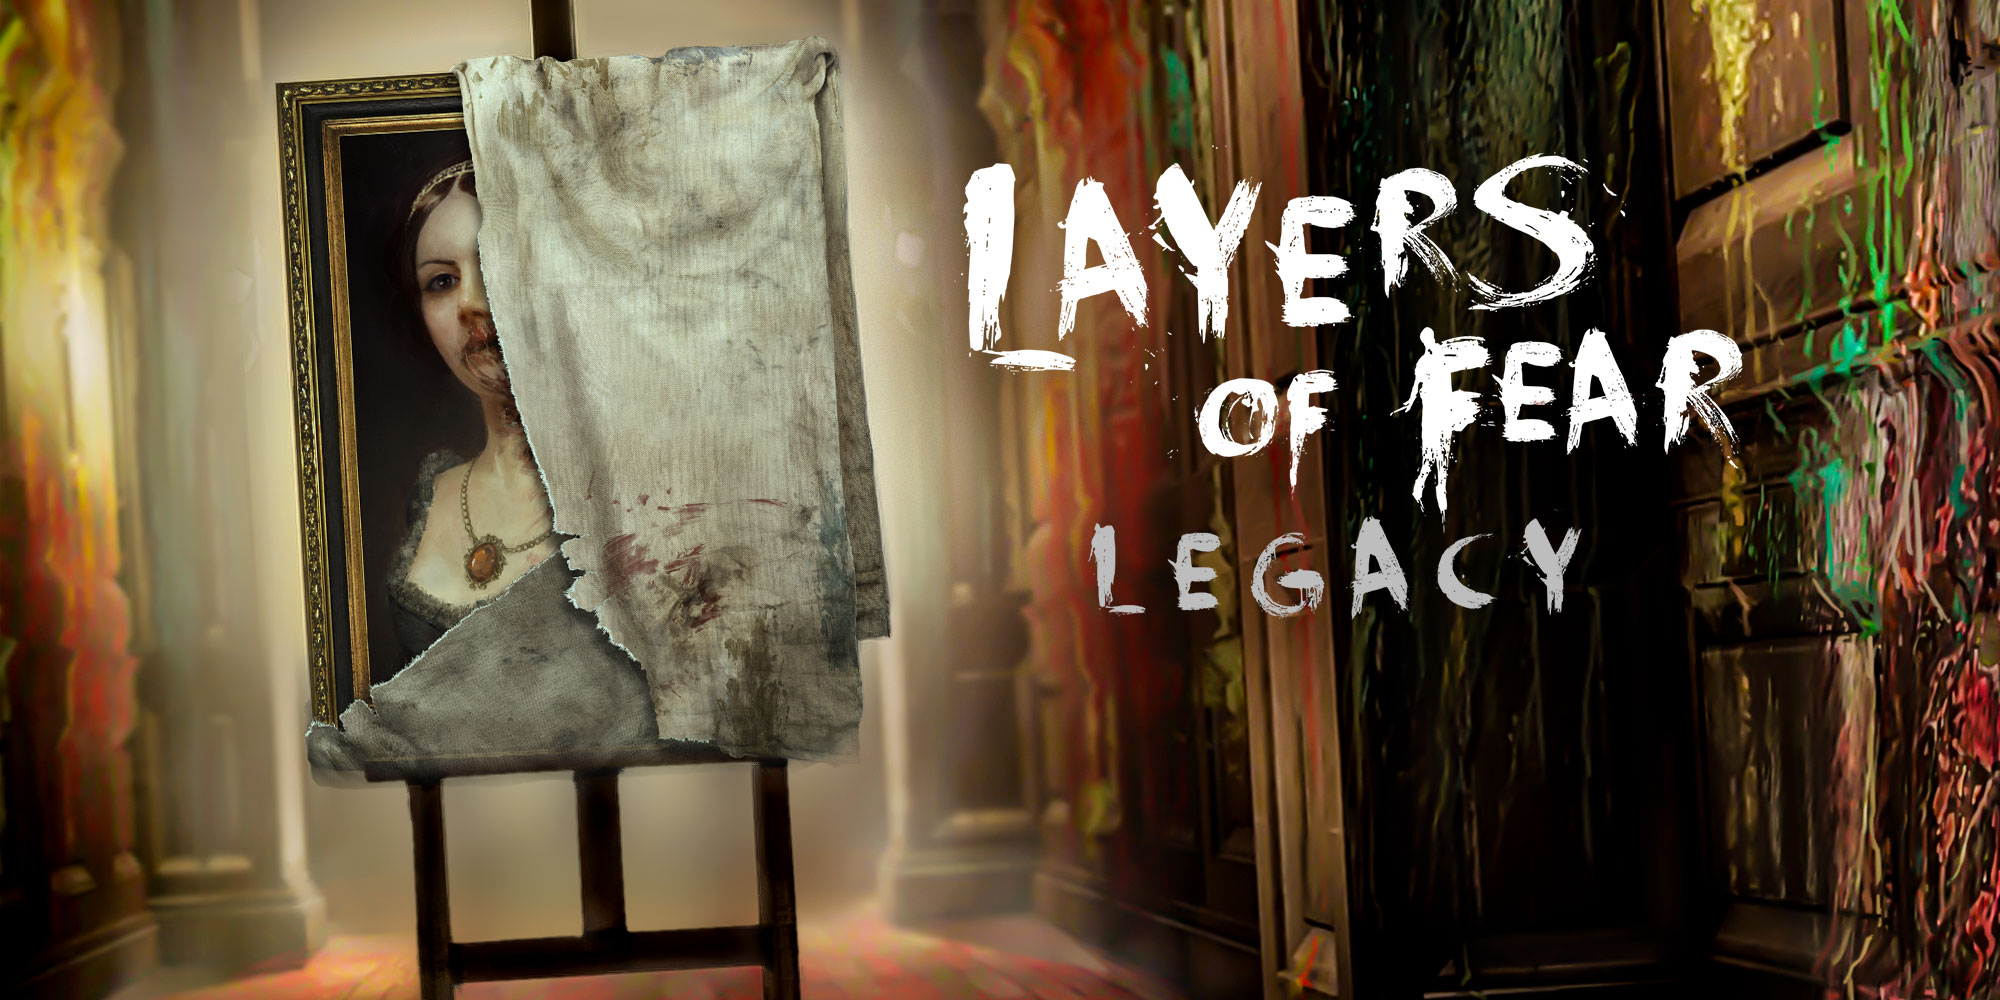 Layers of Fear: Legacy gets Switch release date - The Indie Game Website